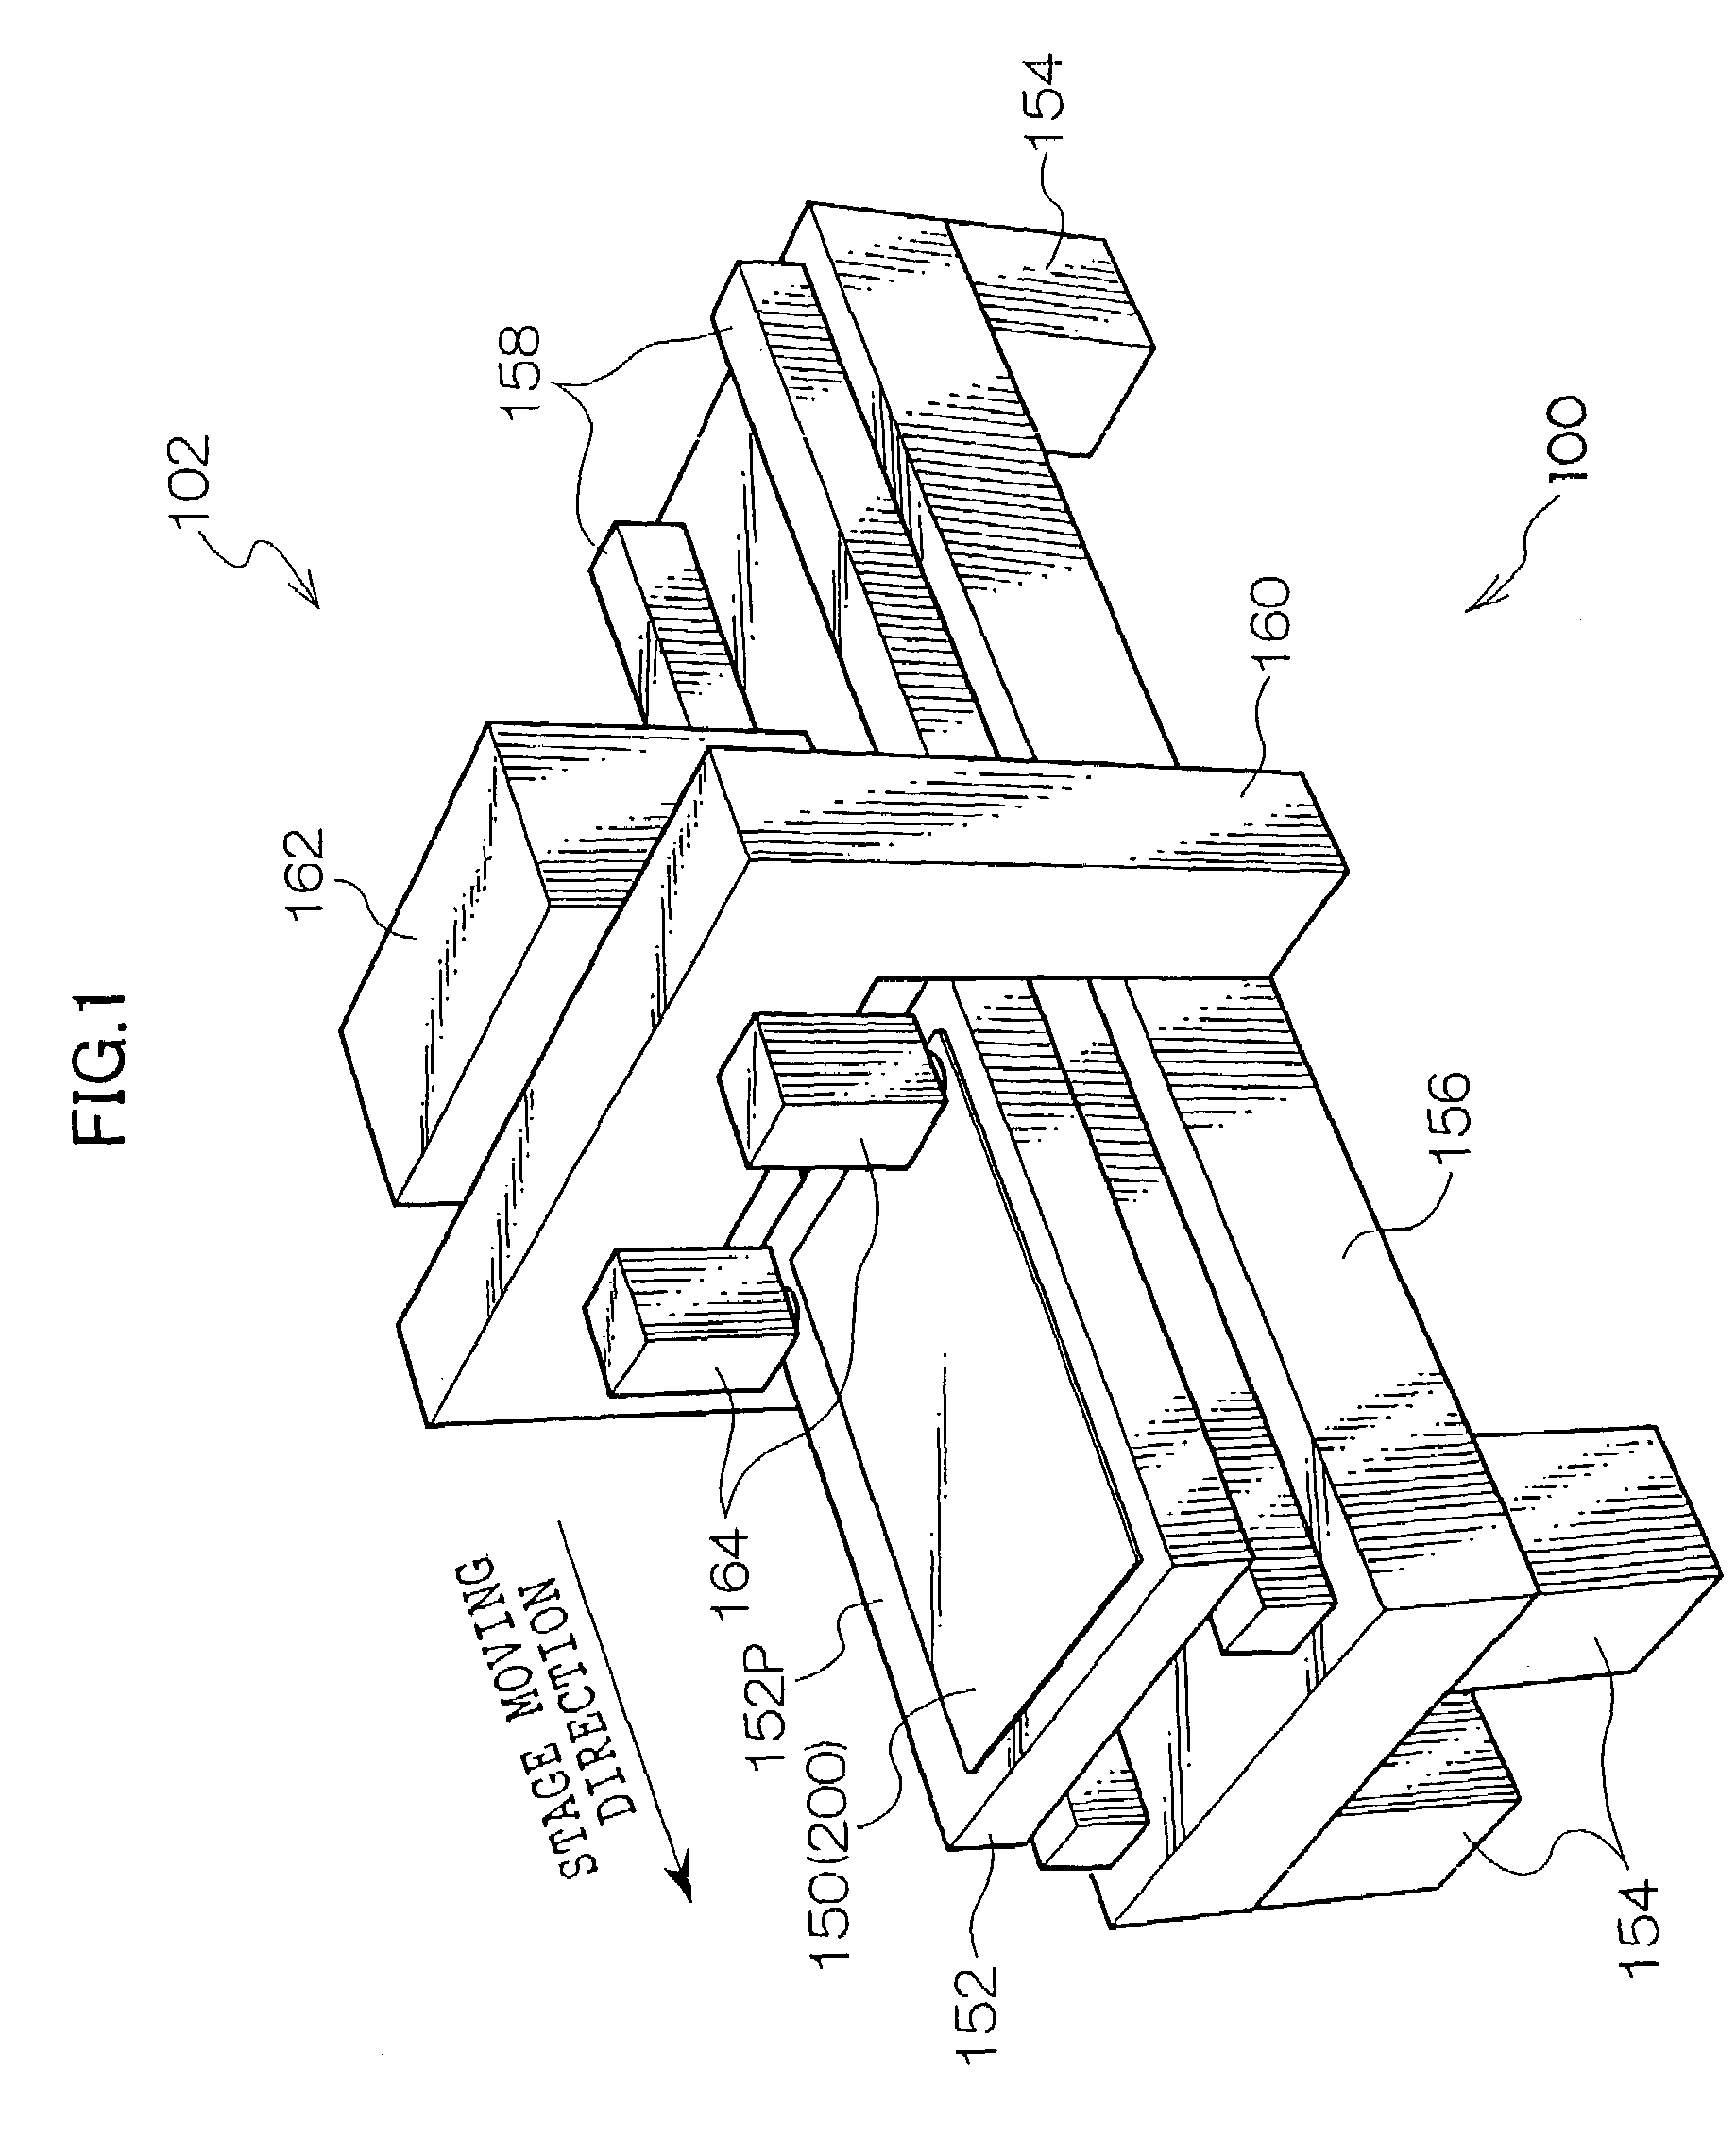 Optical wiring substrate fabrication process and optical wiring substrate device